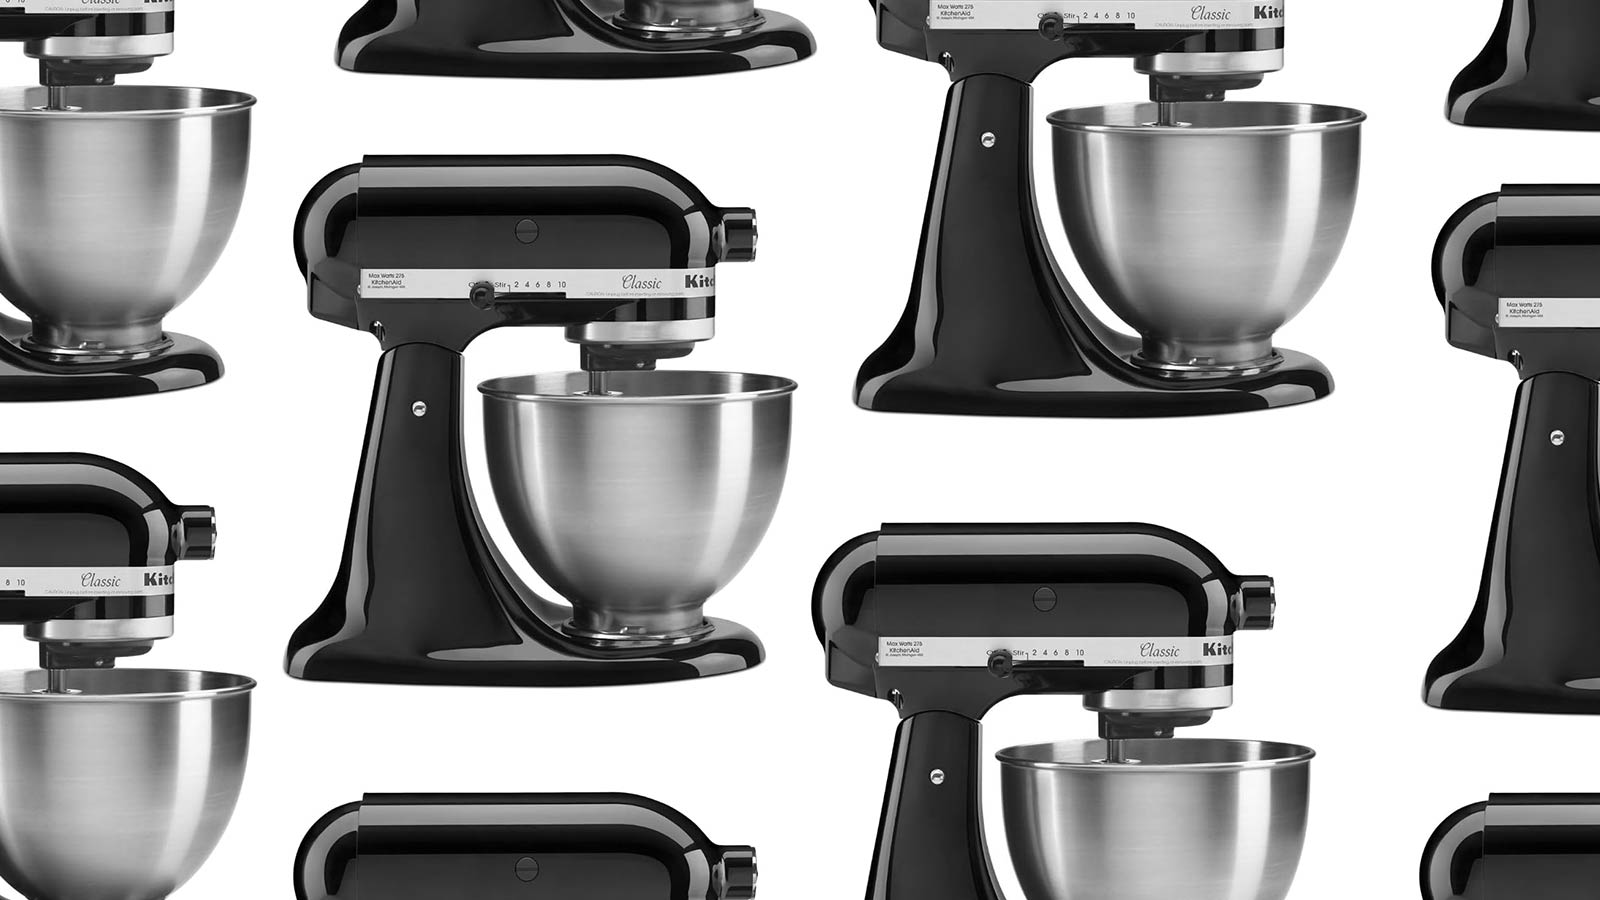 Slice up to 30% off KitchenAid mixers and more with this early Black Friday sale at Amazon